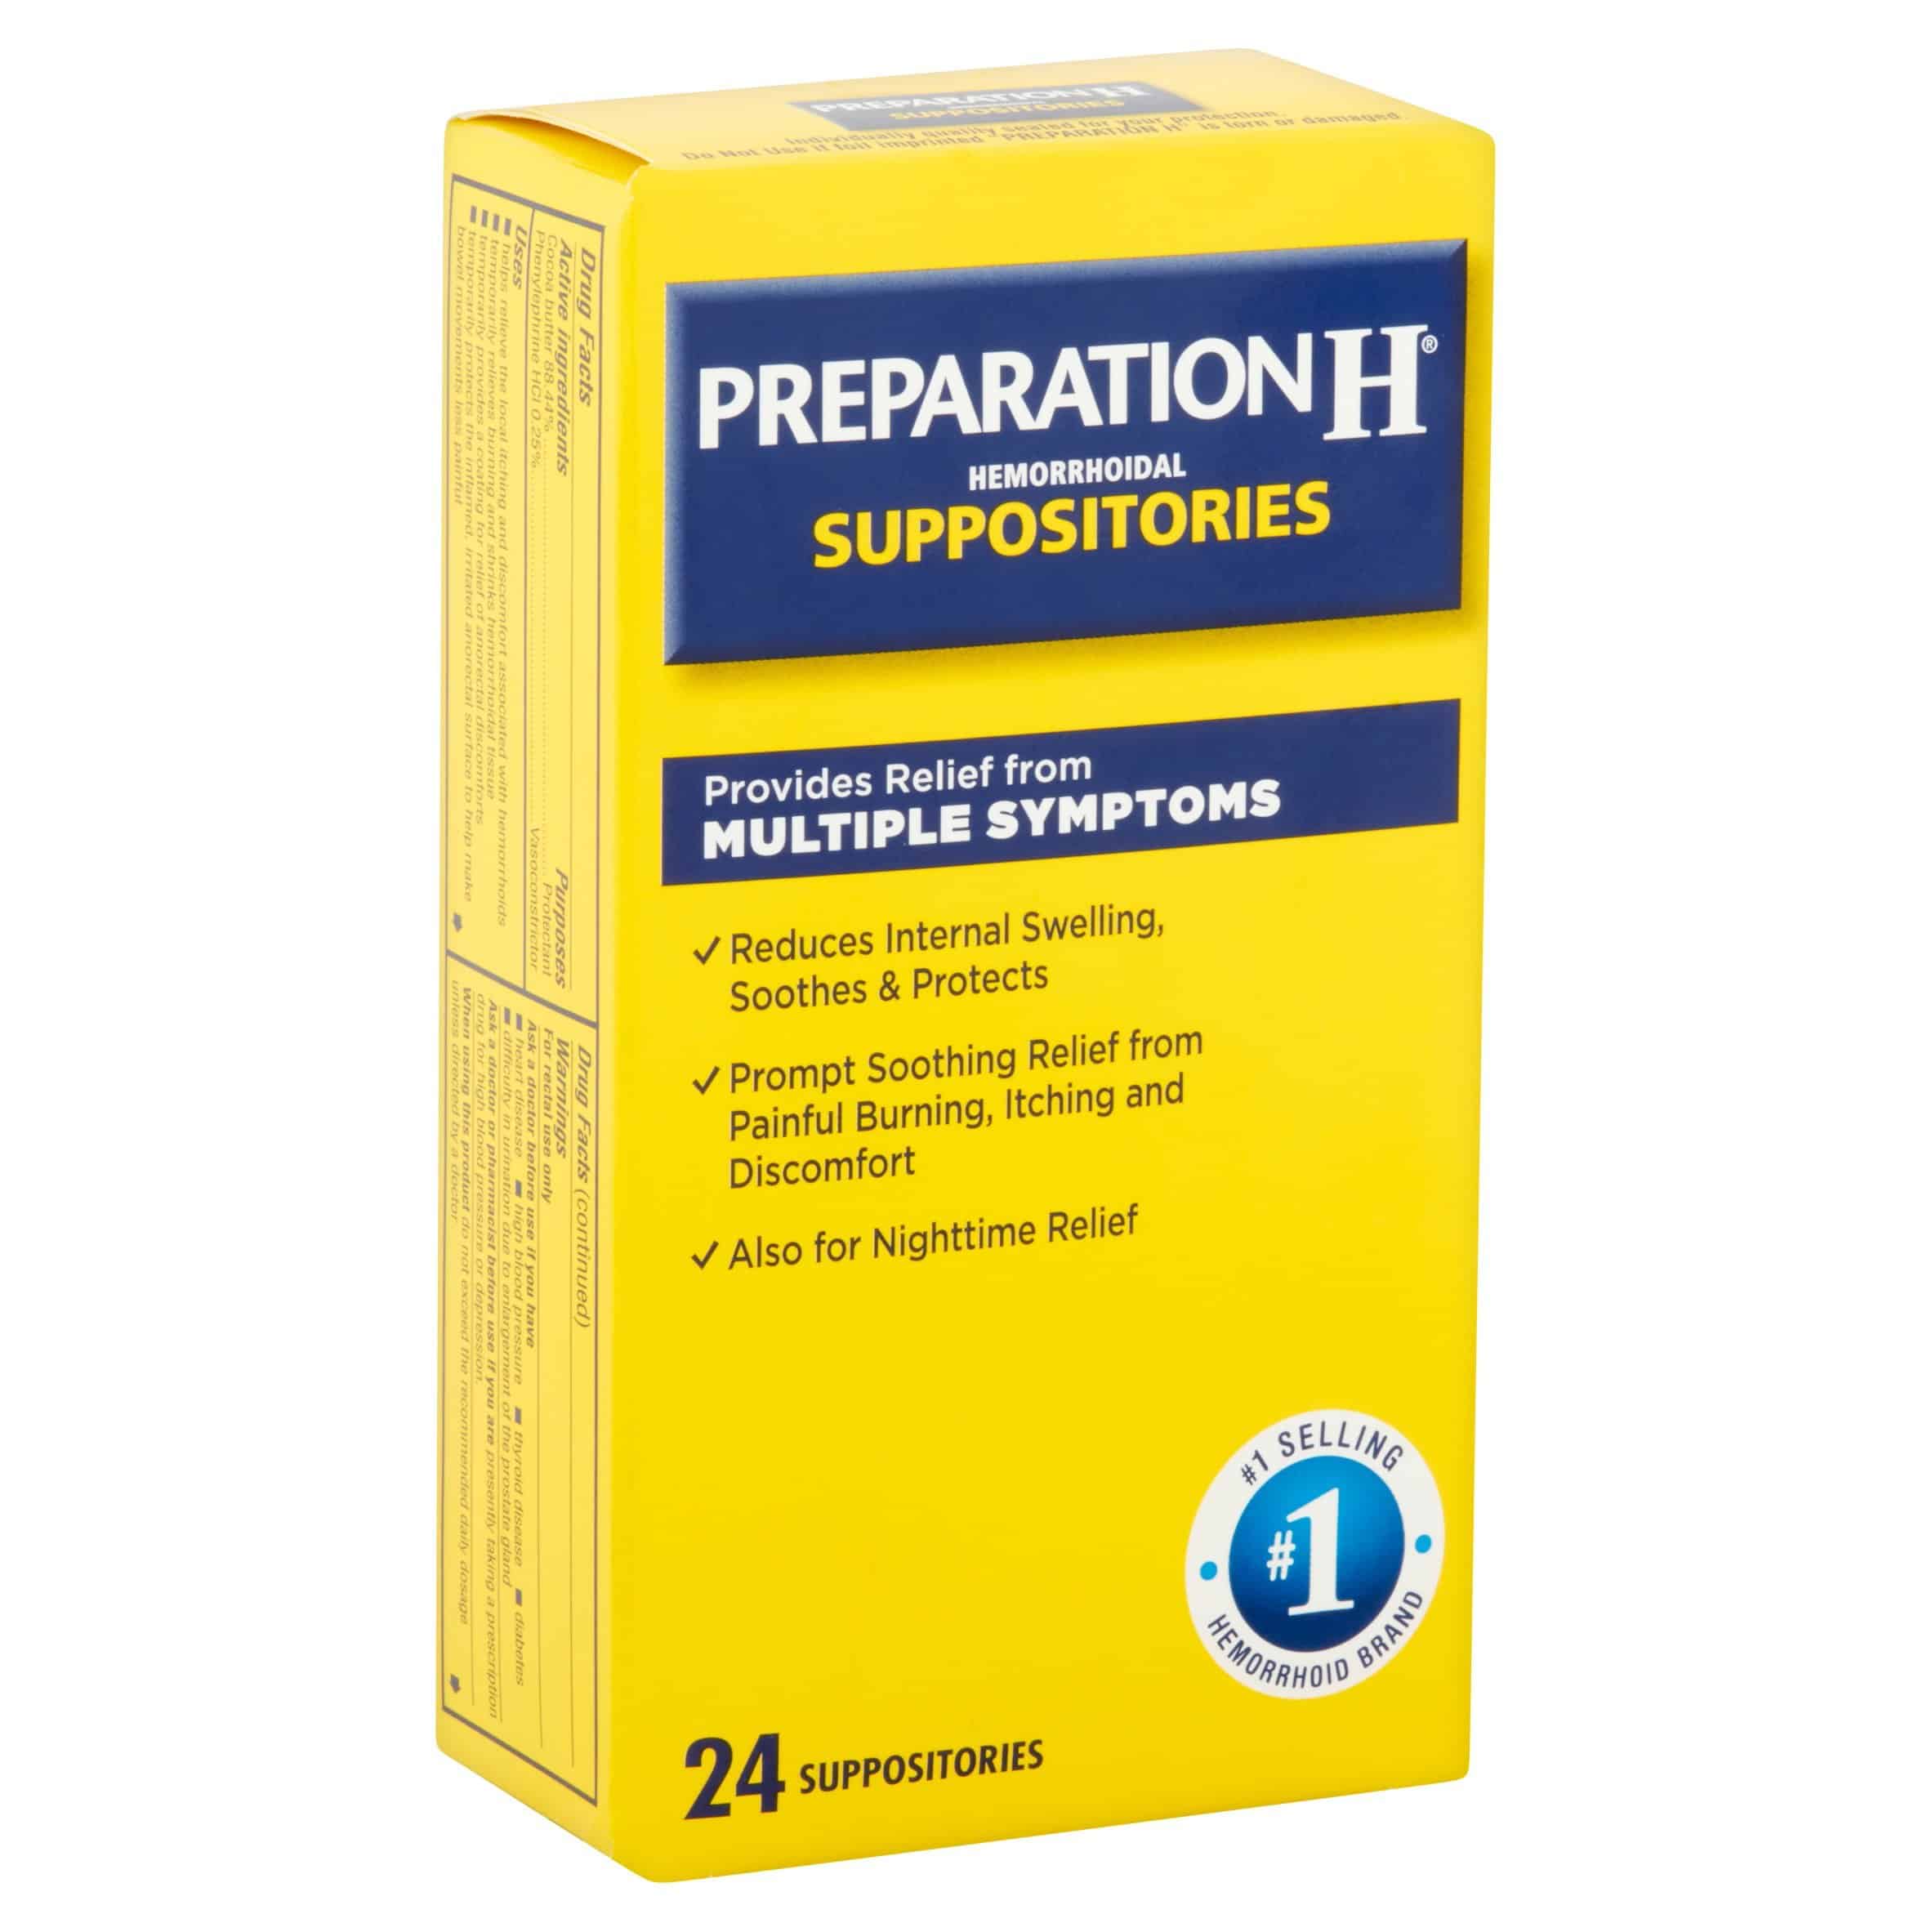 Preparation H Hemorrhoidal Suppositories Soothes Protects Itch 24 Count ...